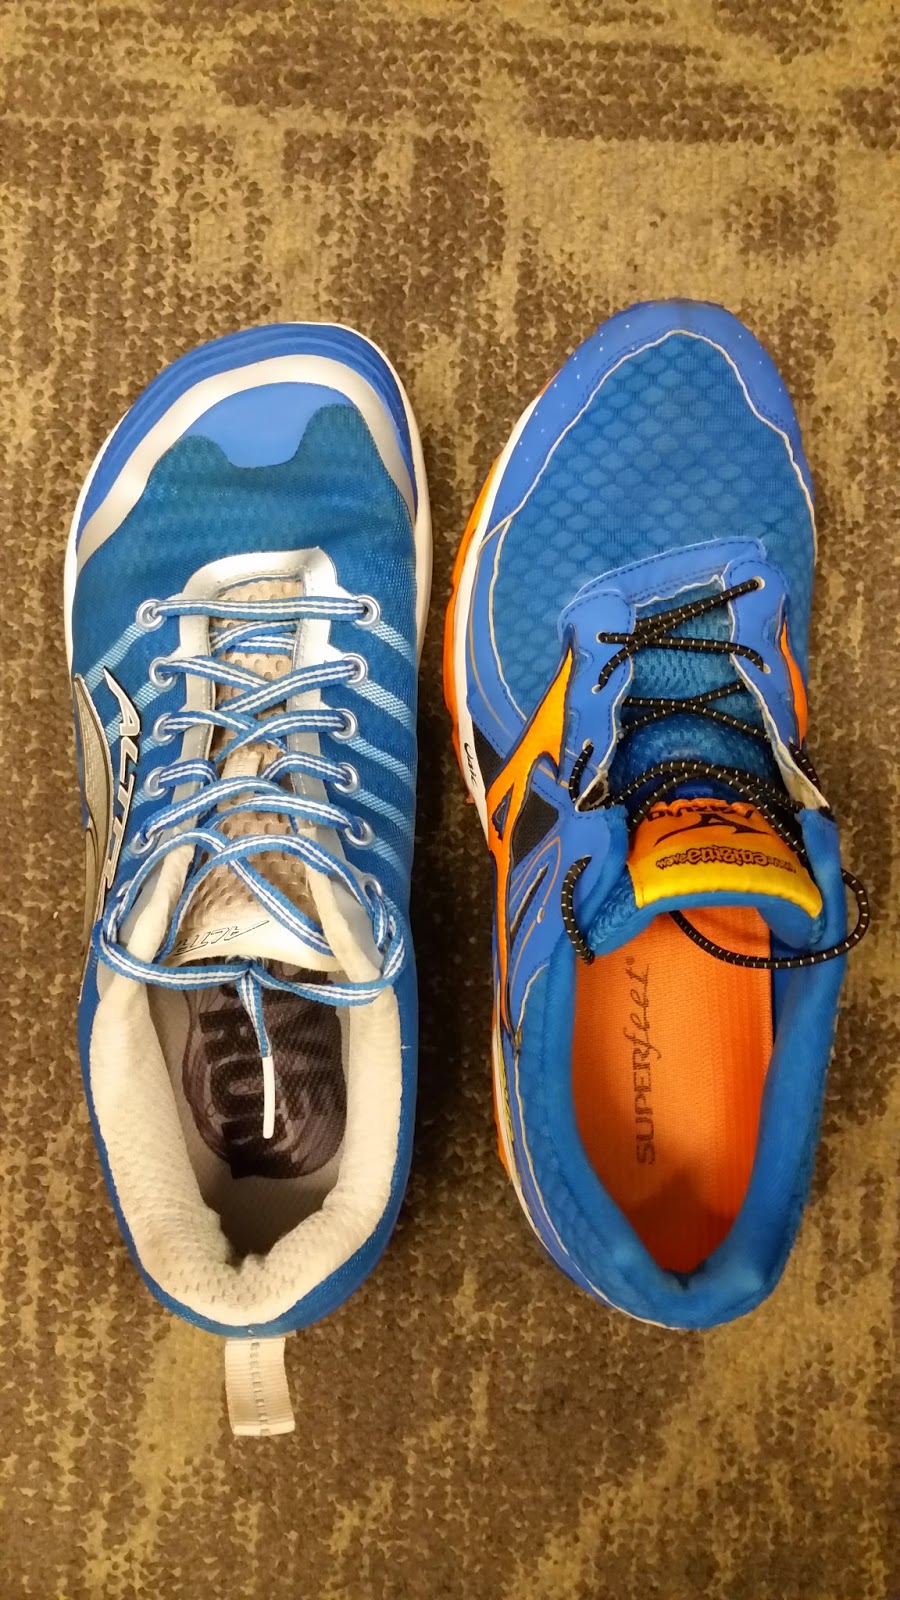 Running Without Injuries: Why I run in clown shoes, and you should too.